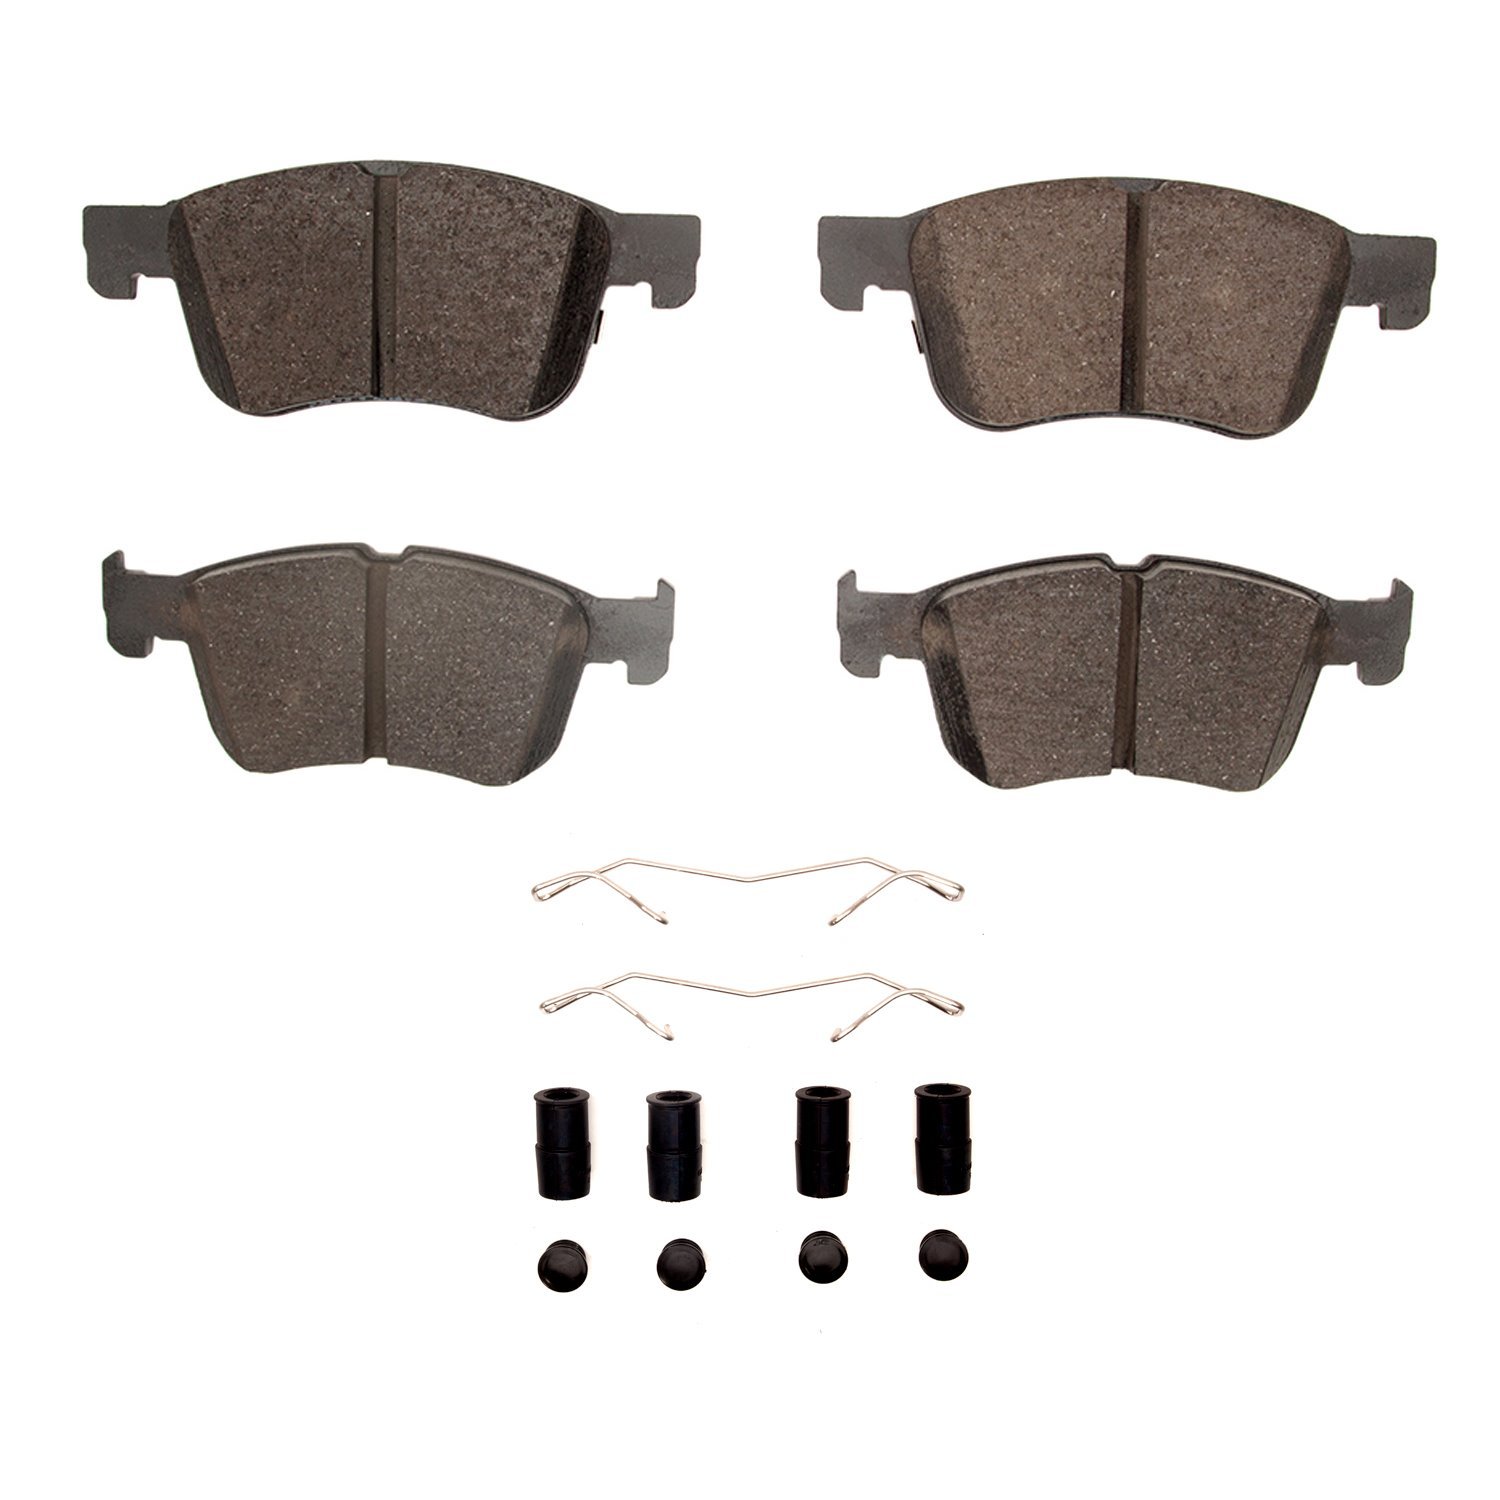 1551-2300-01 5000 Advanced Ceramic Brake Pads & Hardware Kit, Fits Select Ford/Lincoln/Mercury/Mazda, Position: Front